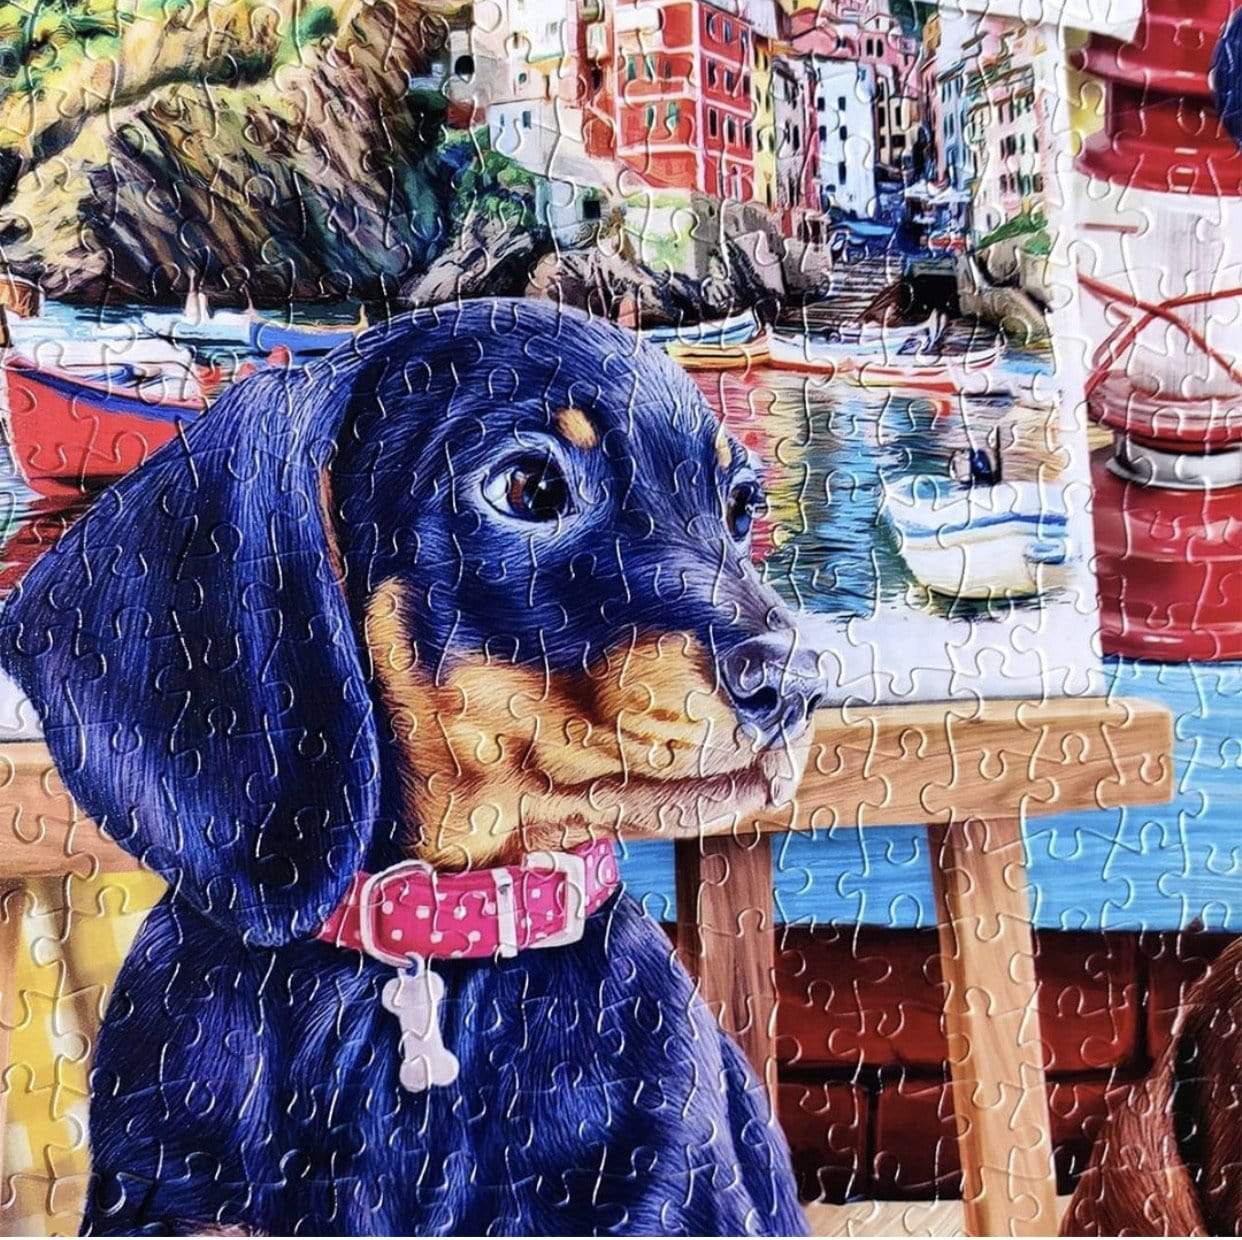 Puppies in the Studio - 1200 Piece Jigsaw Puzzle